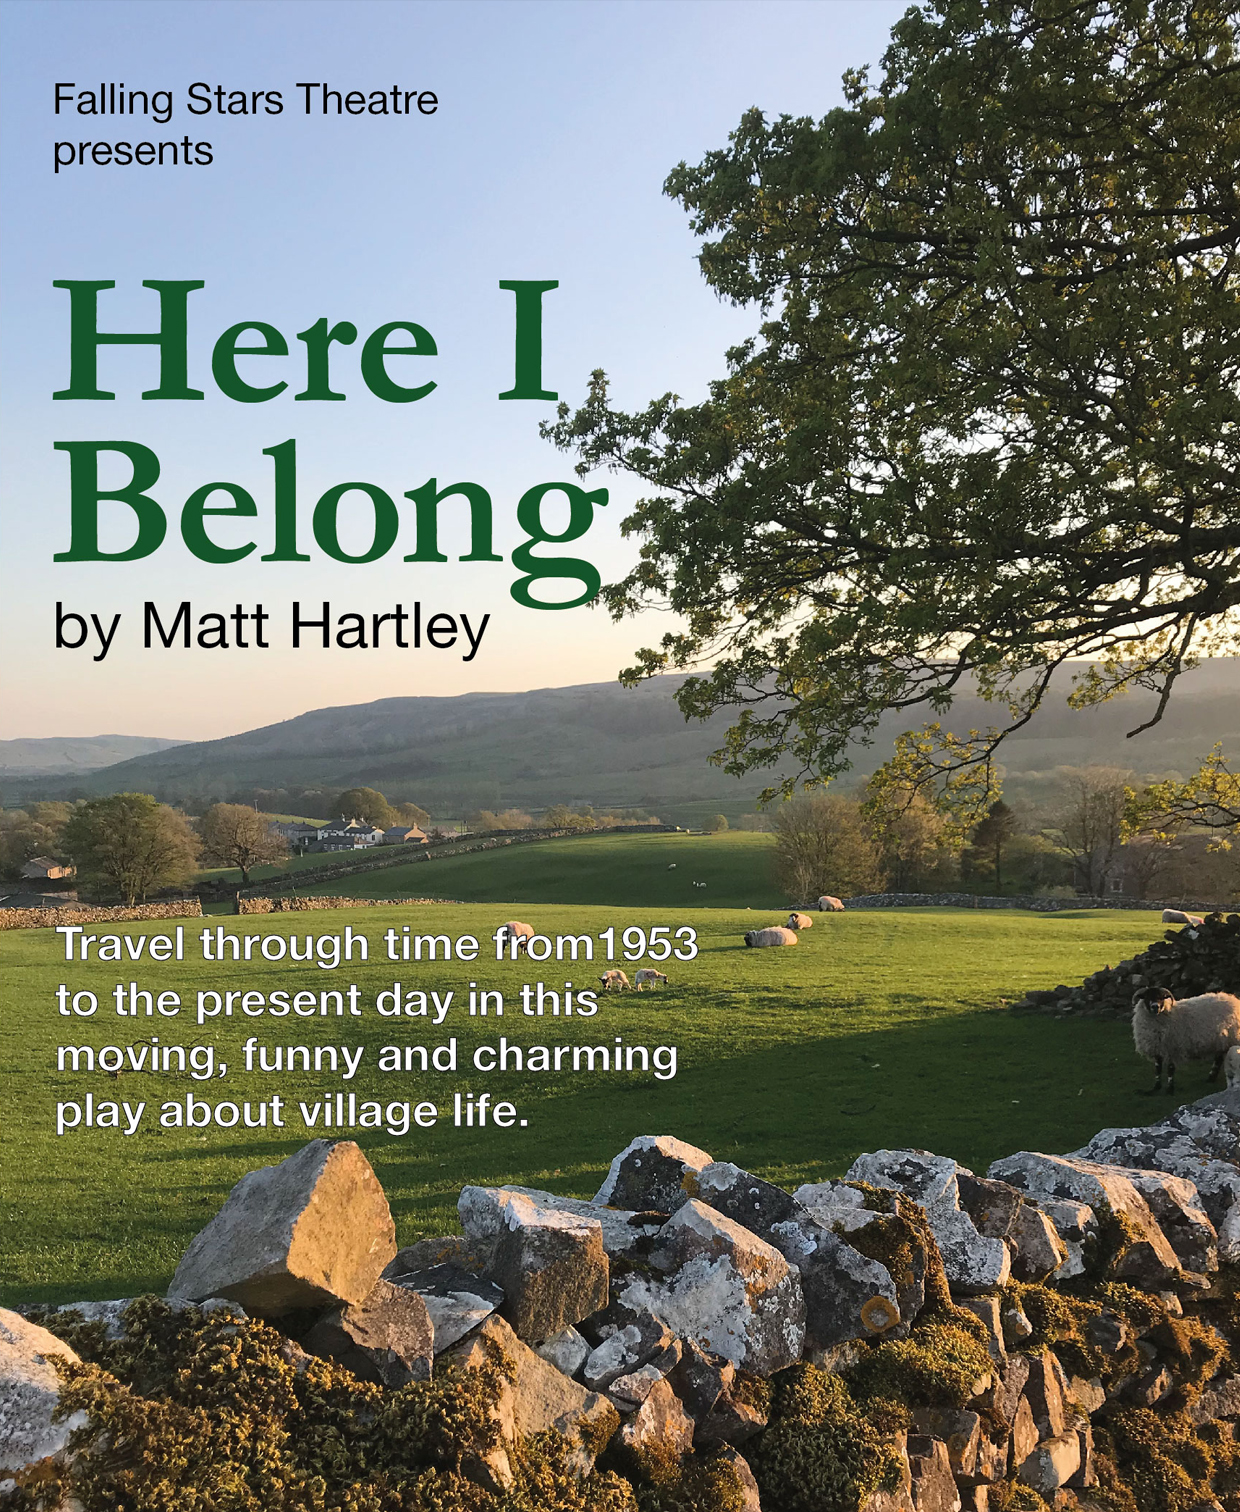 Here belong i by Falling Stars Theatre